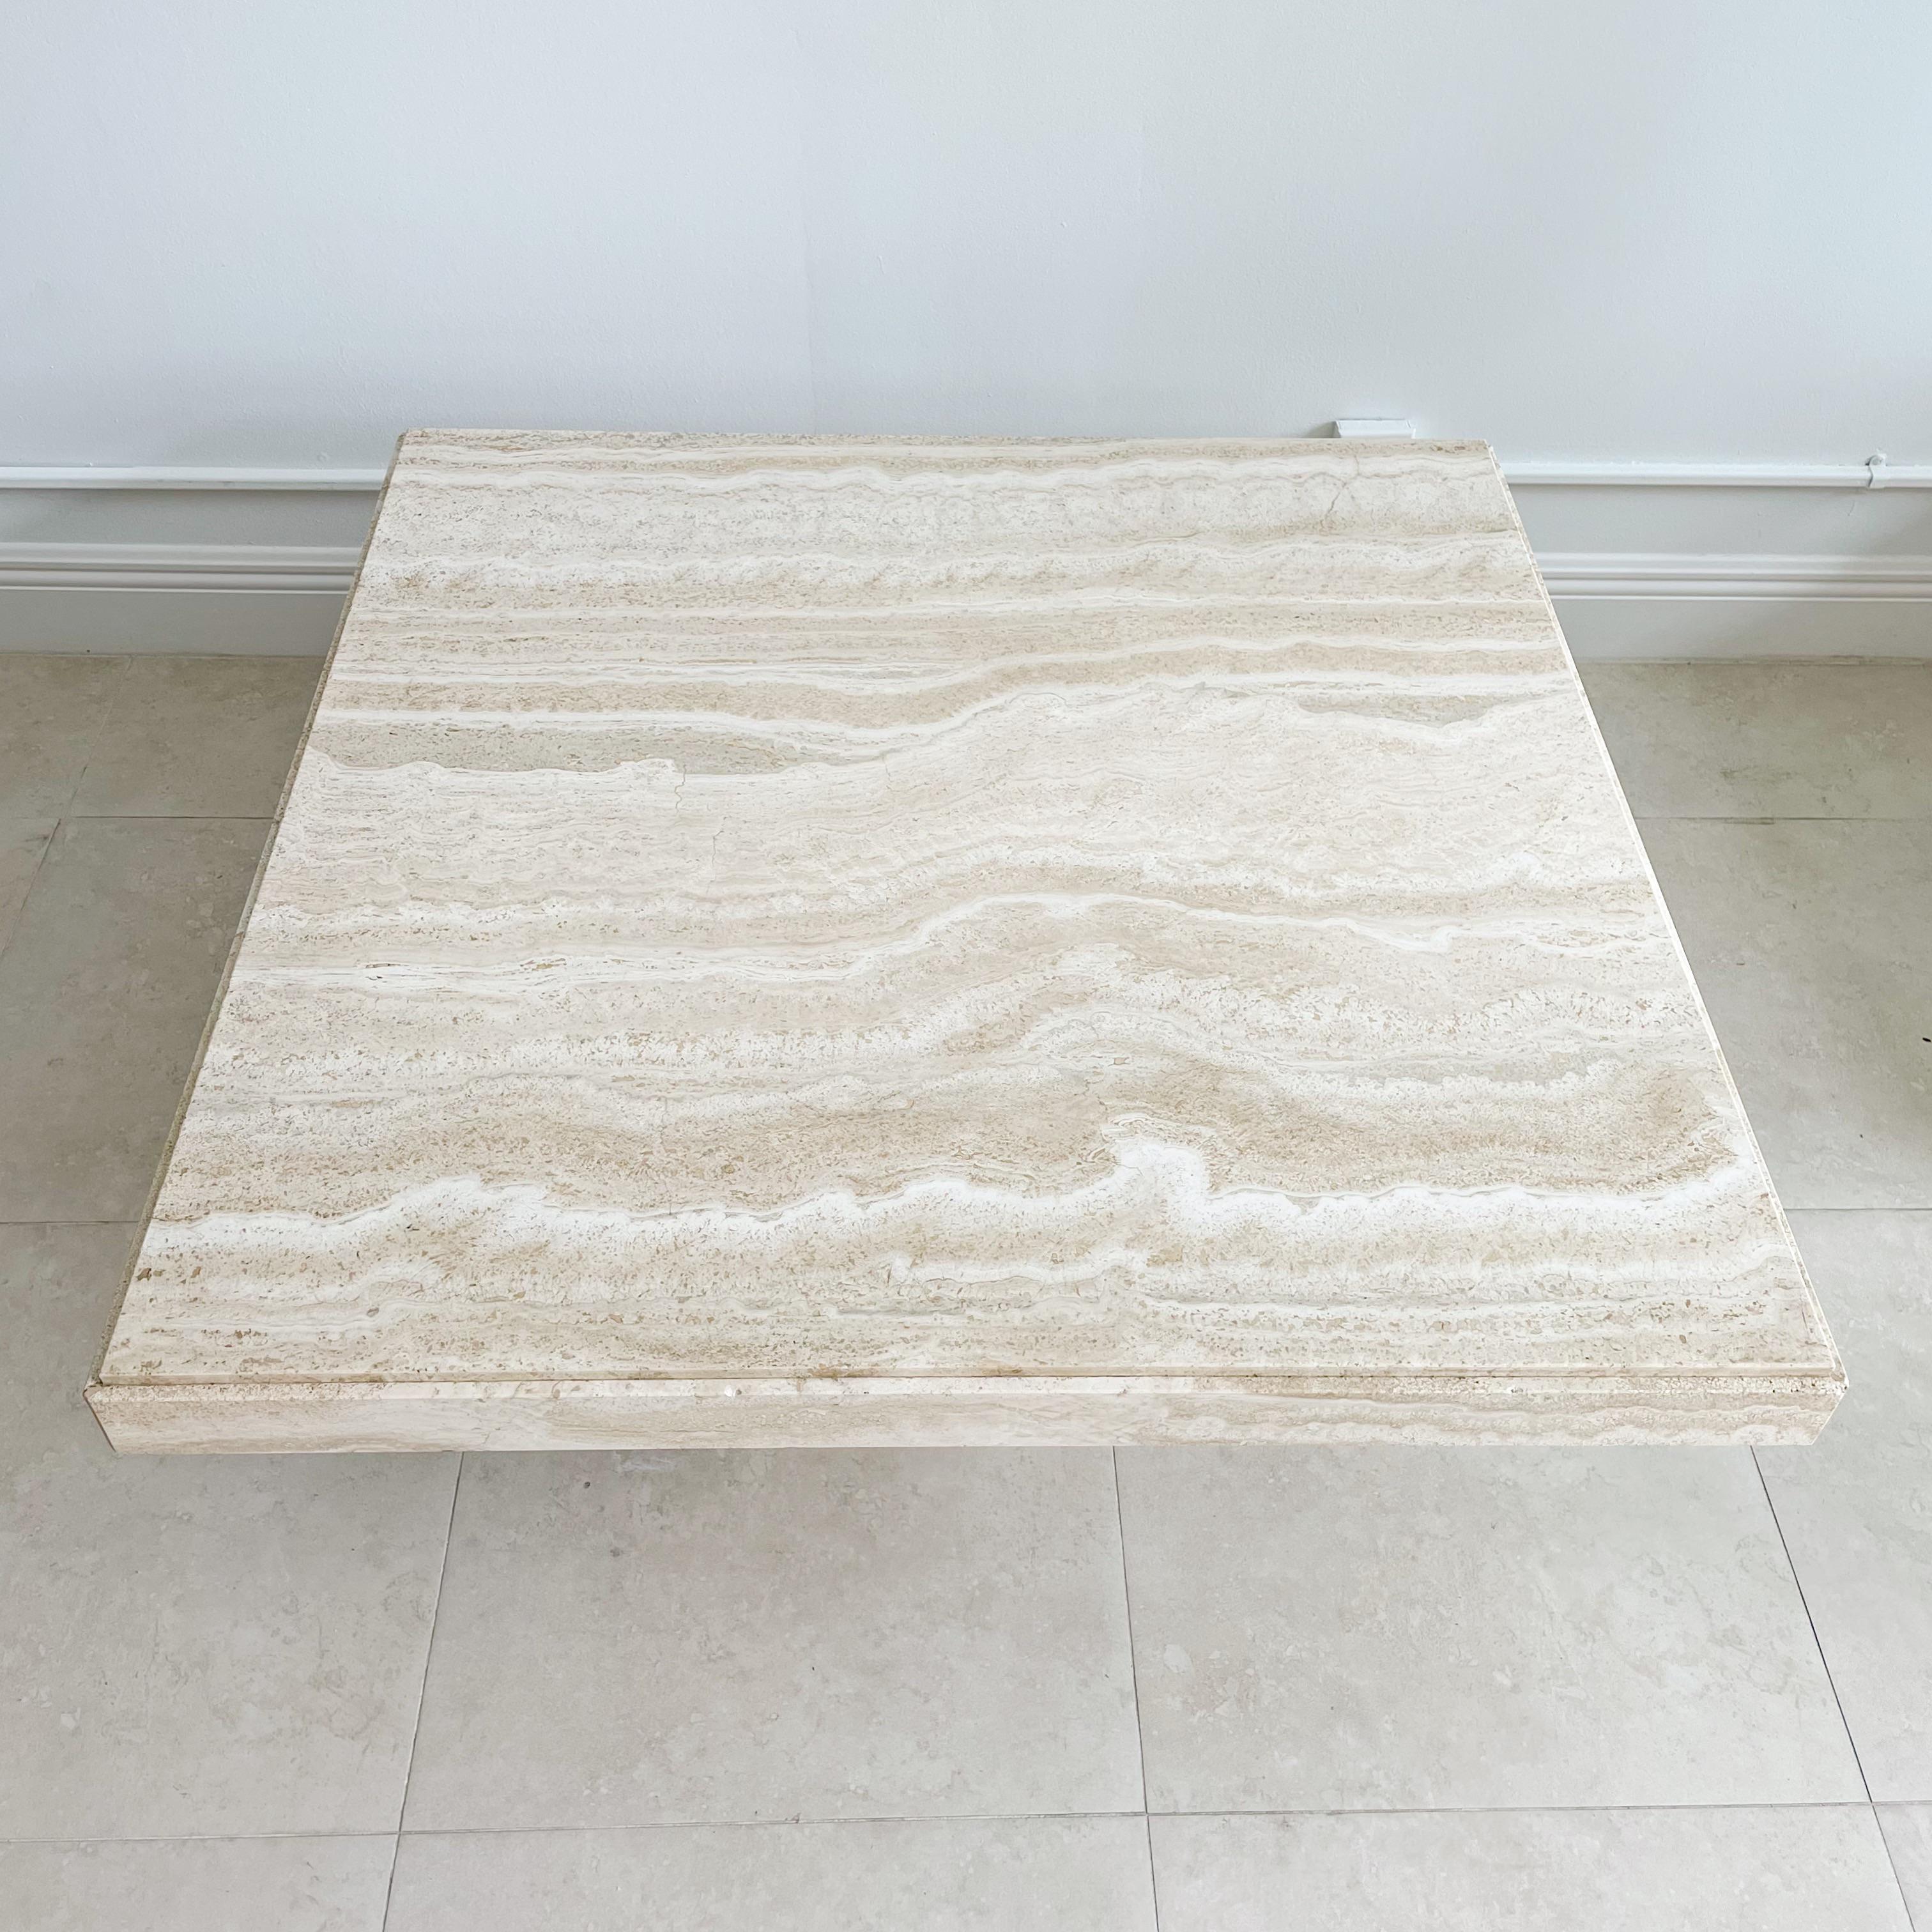 Hand-Crafted 1970's Italian Travertine Marble Square Coffee Cocktail Table